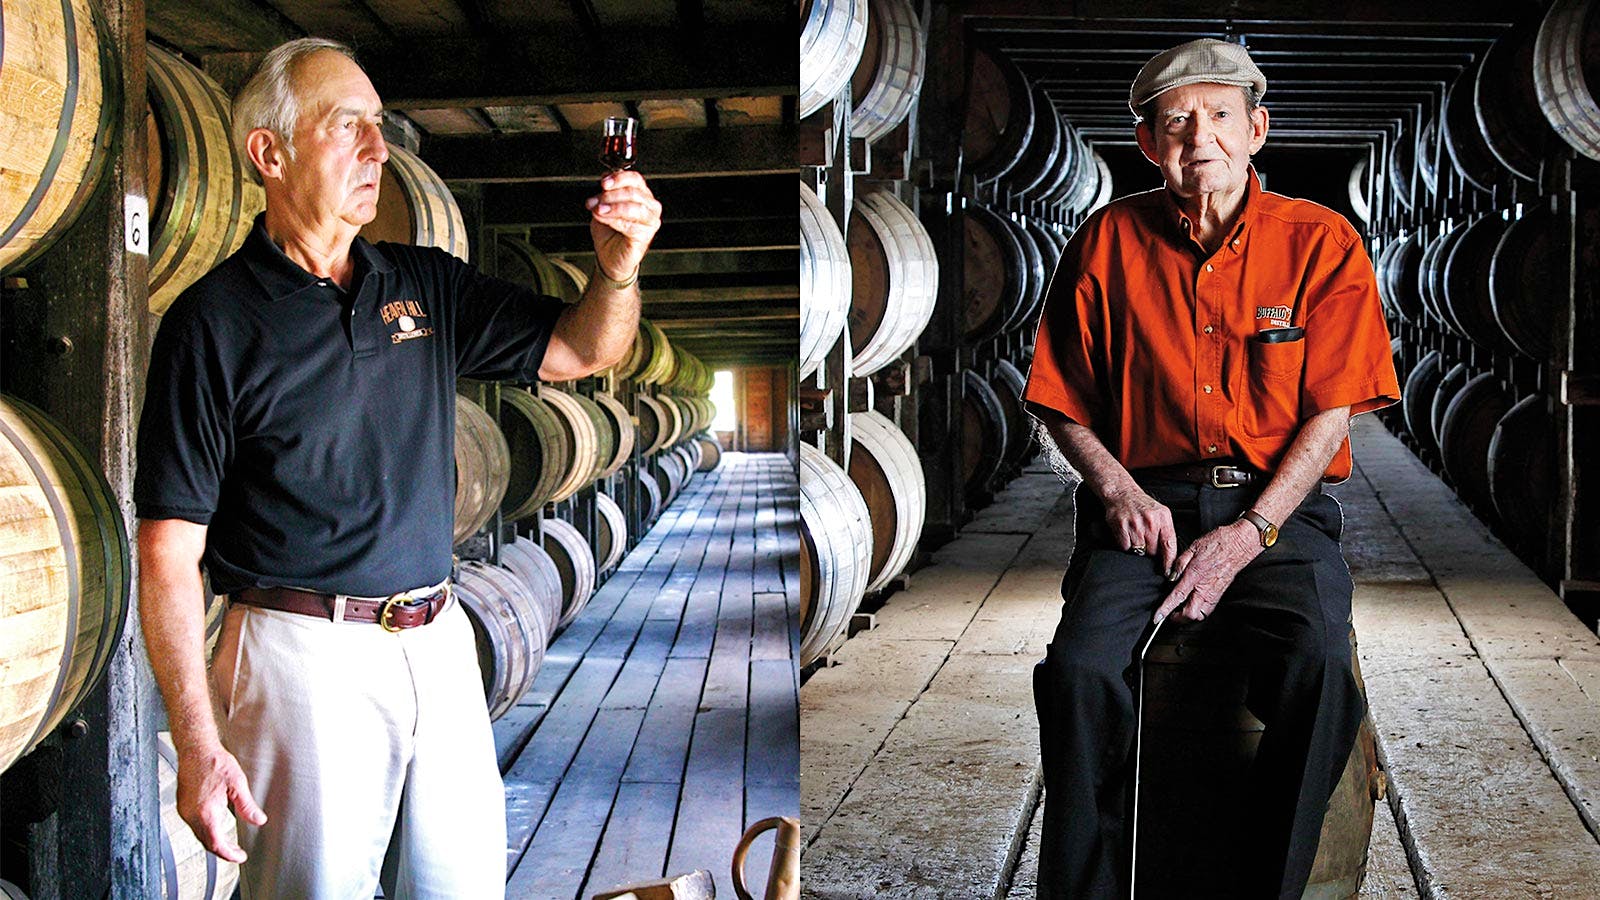 Departed legends Parker Beam (left) and Elmer T. Lee (right) saw the ups and downs of Bourbon.